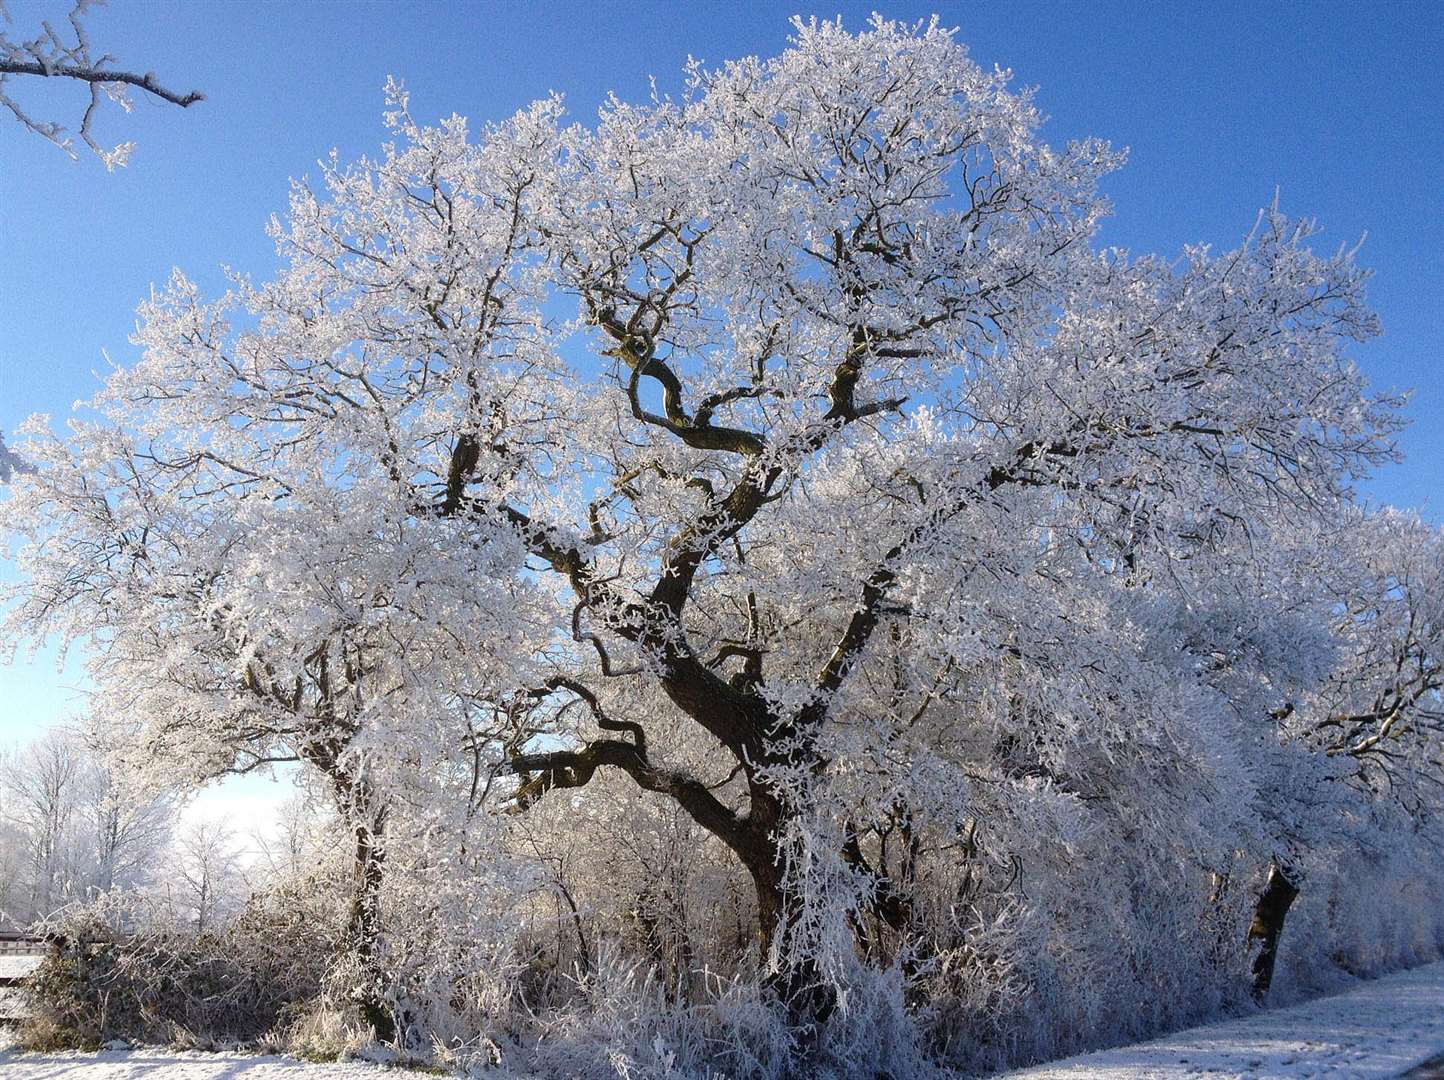 A frost covered tree